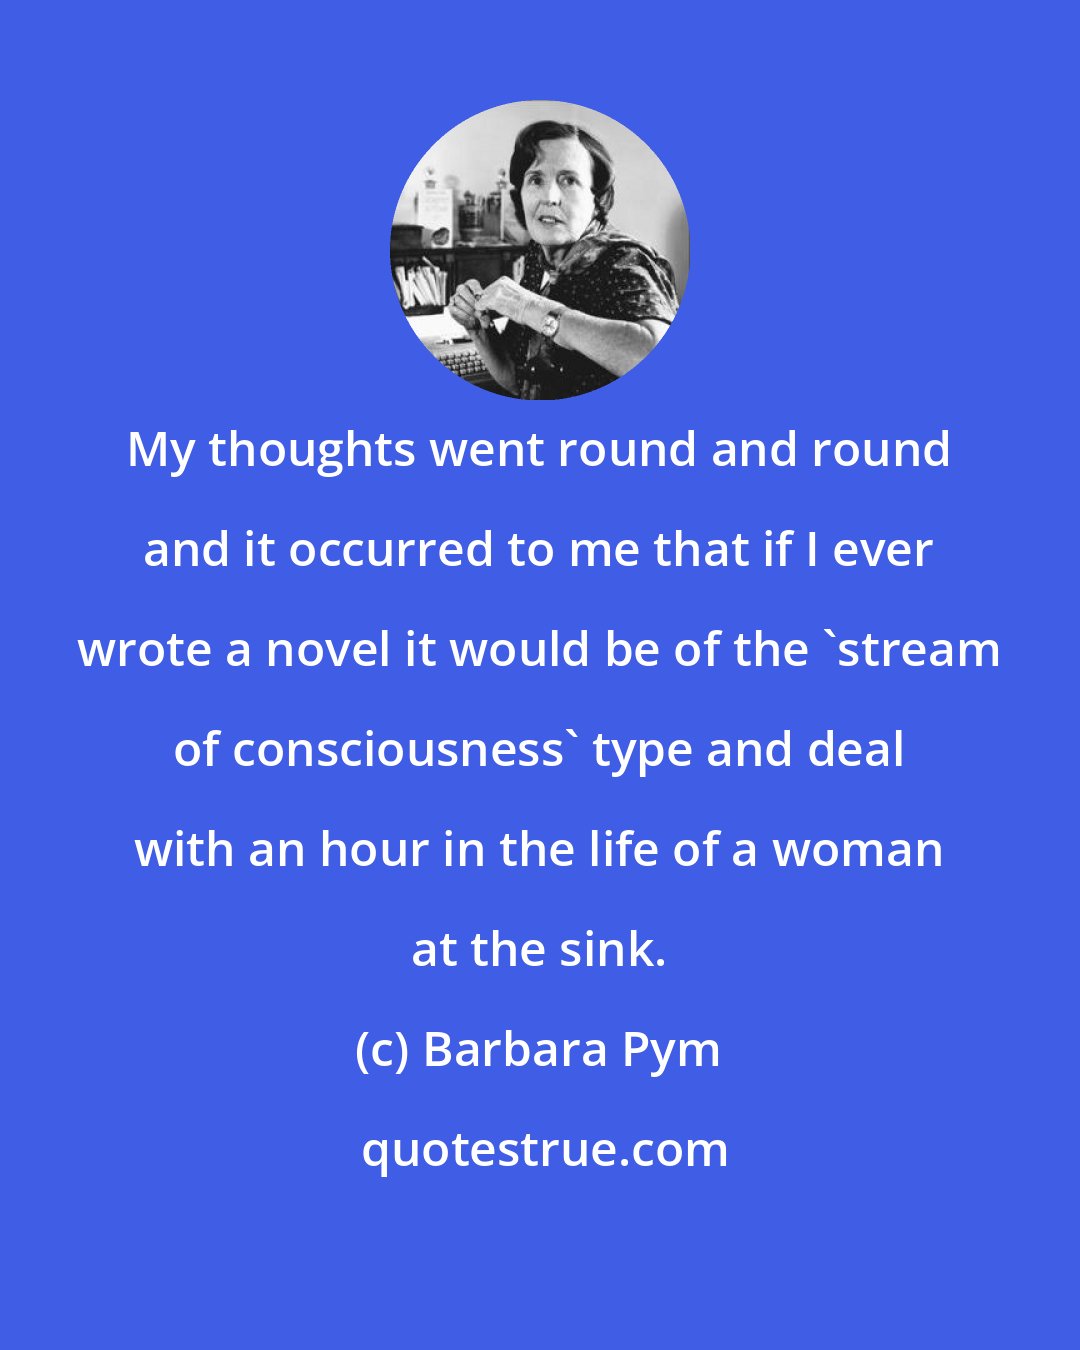 Barbara Pym: My thoughts went round and round and it occurred to me that if I ever wrote a novel it would be of the 'stream of consciousness' type and deal with an hour in the life of a woman at the sink.